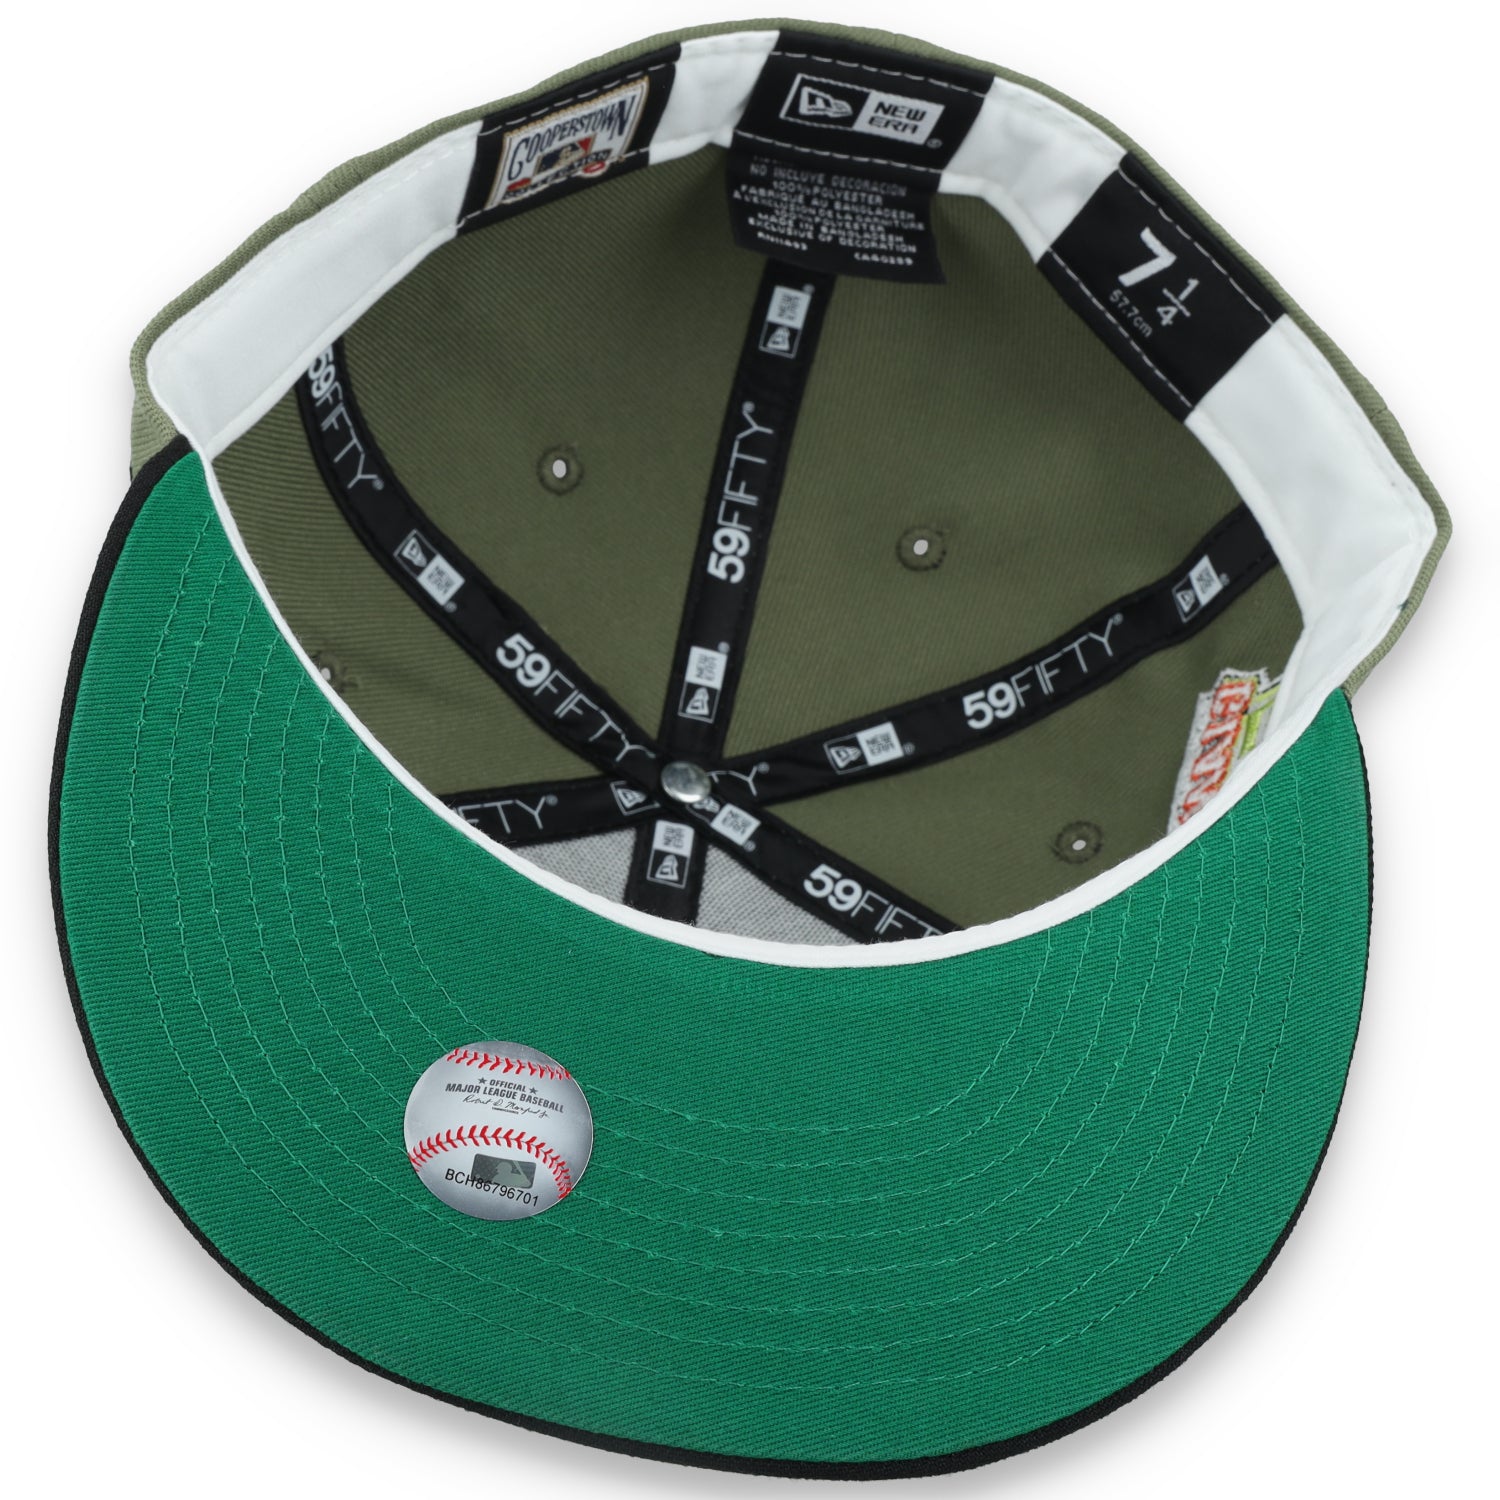 New Era San Francisco Giants 50th Anniversary Side Patch 59FIFTY Fitted Hat- Olive Green